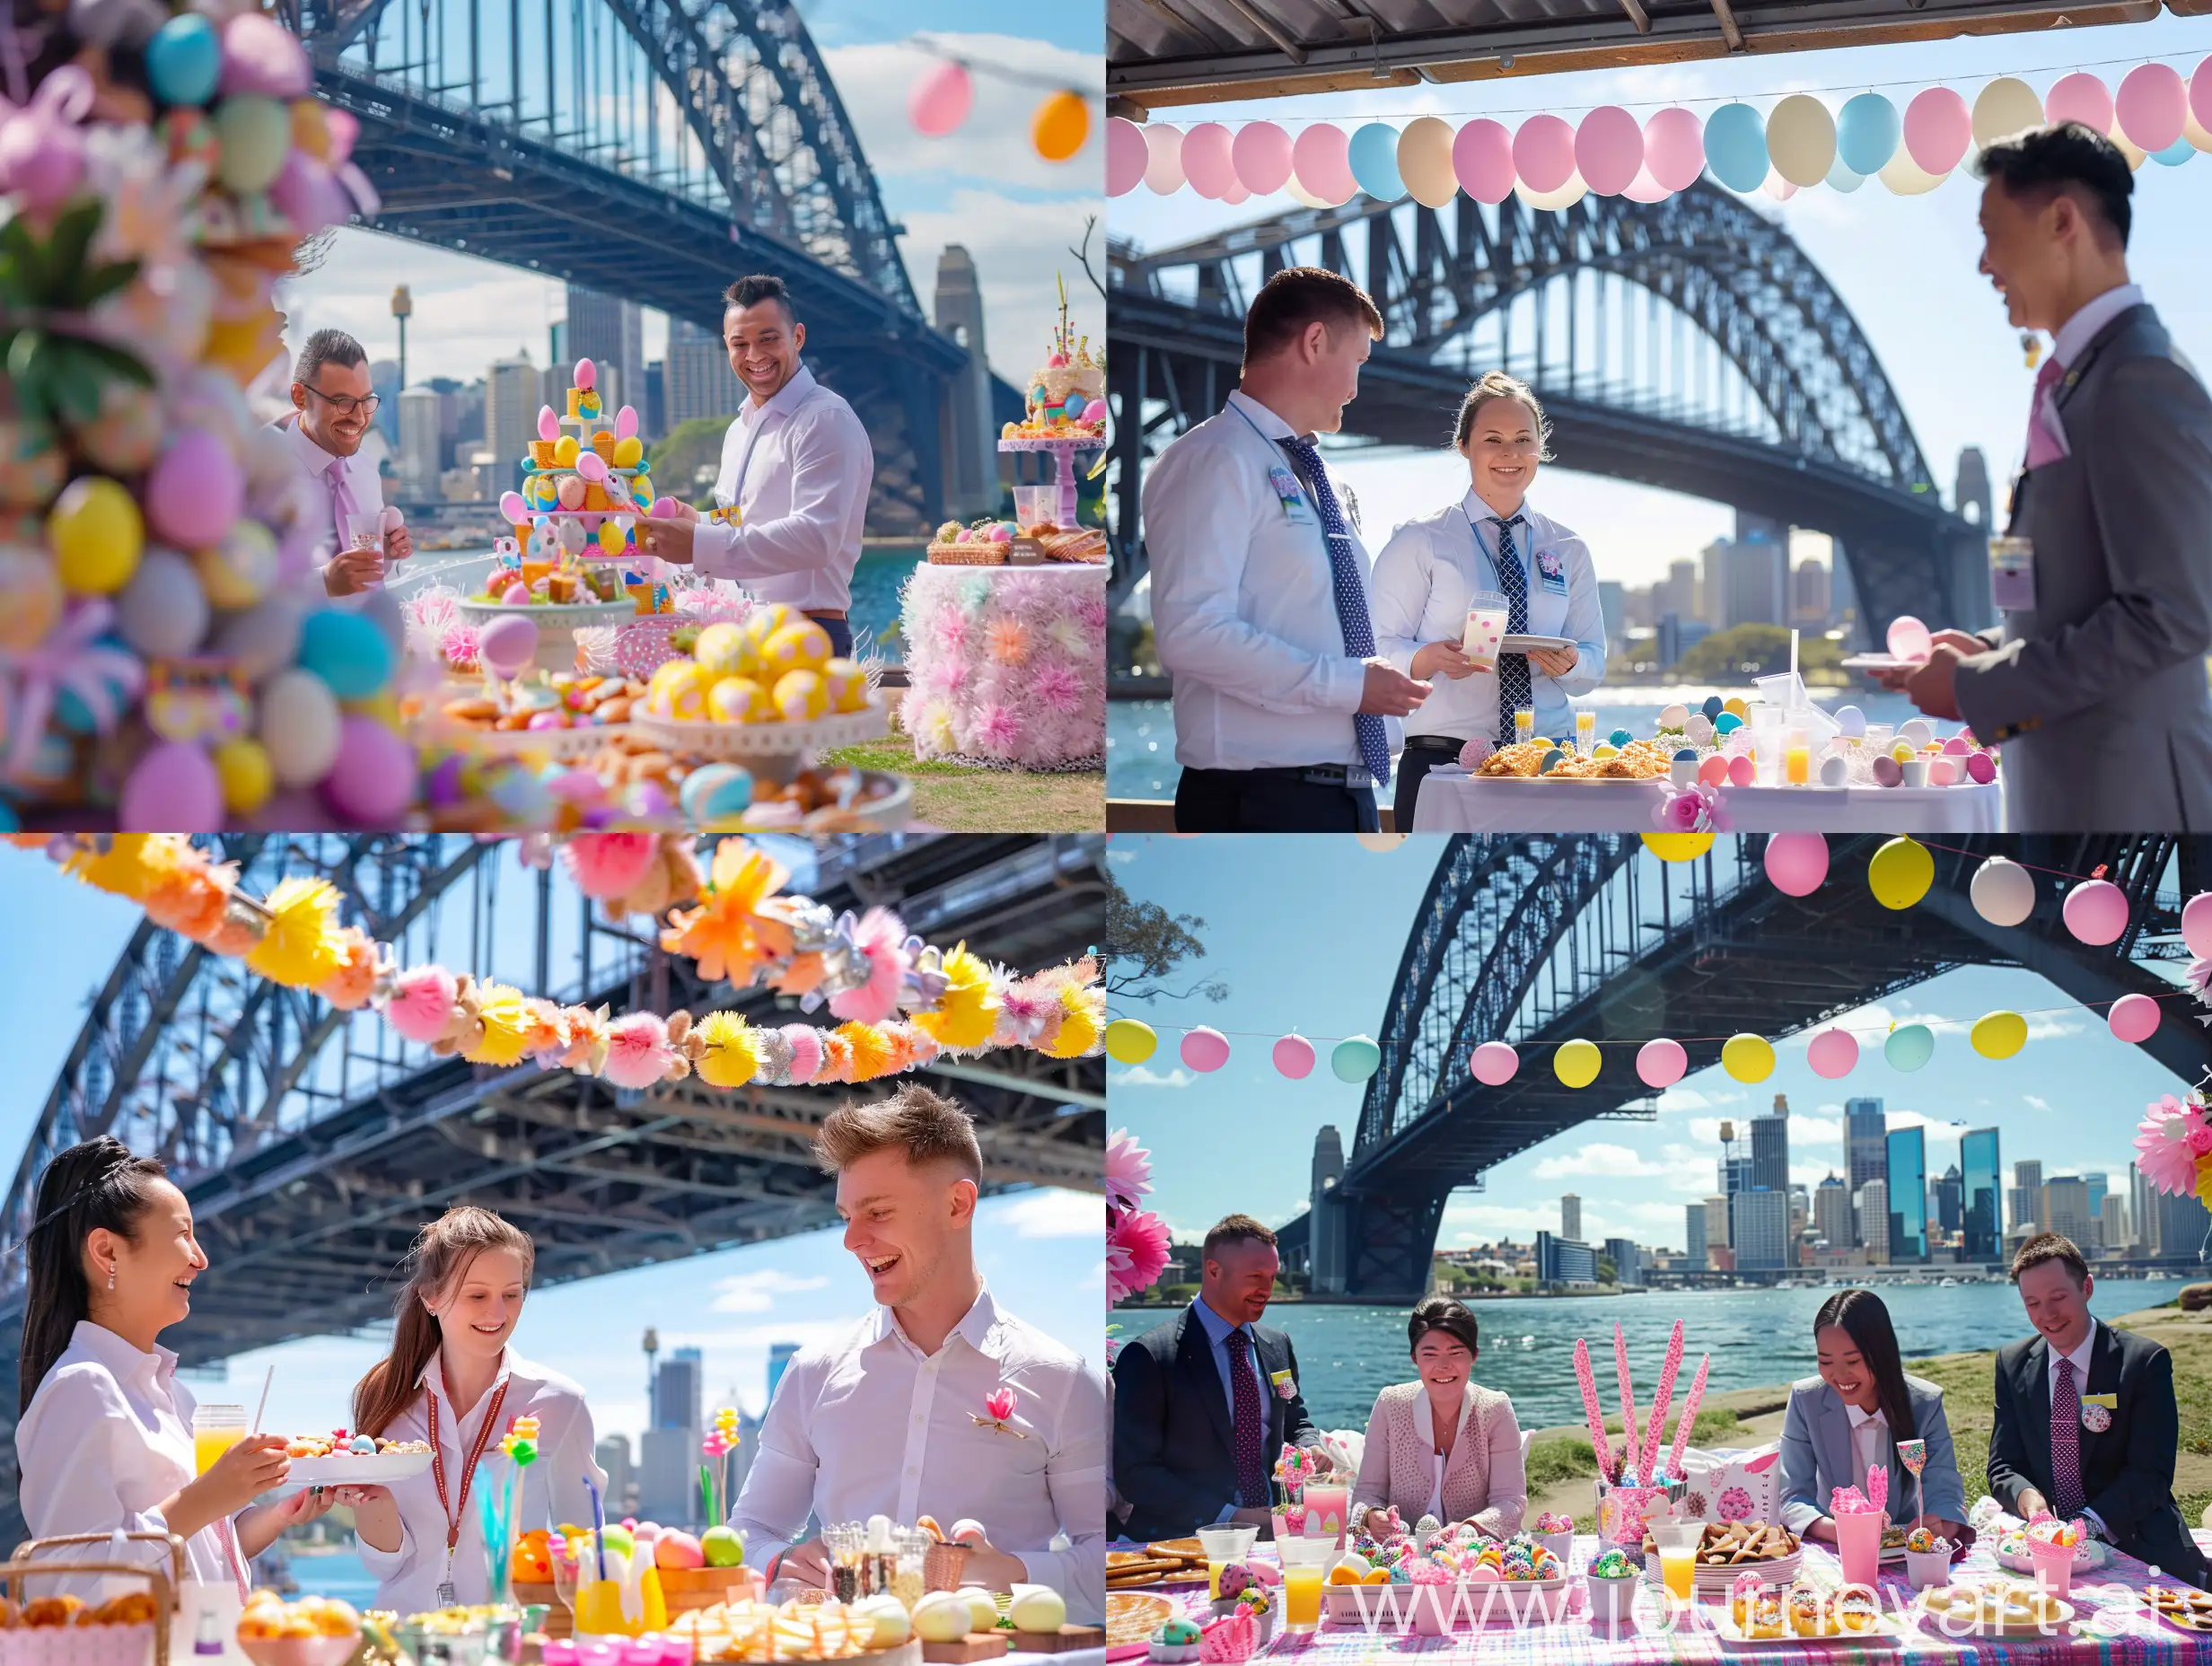 A decorated Easter party under Sydney harbor bridge with a few joyful international bank's staff, who are happily enjoying the snacks and drink.